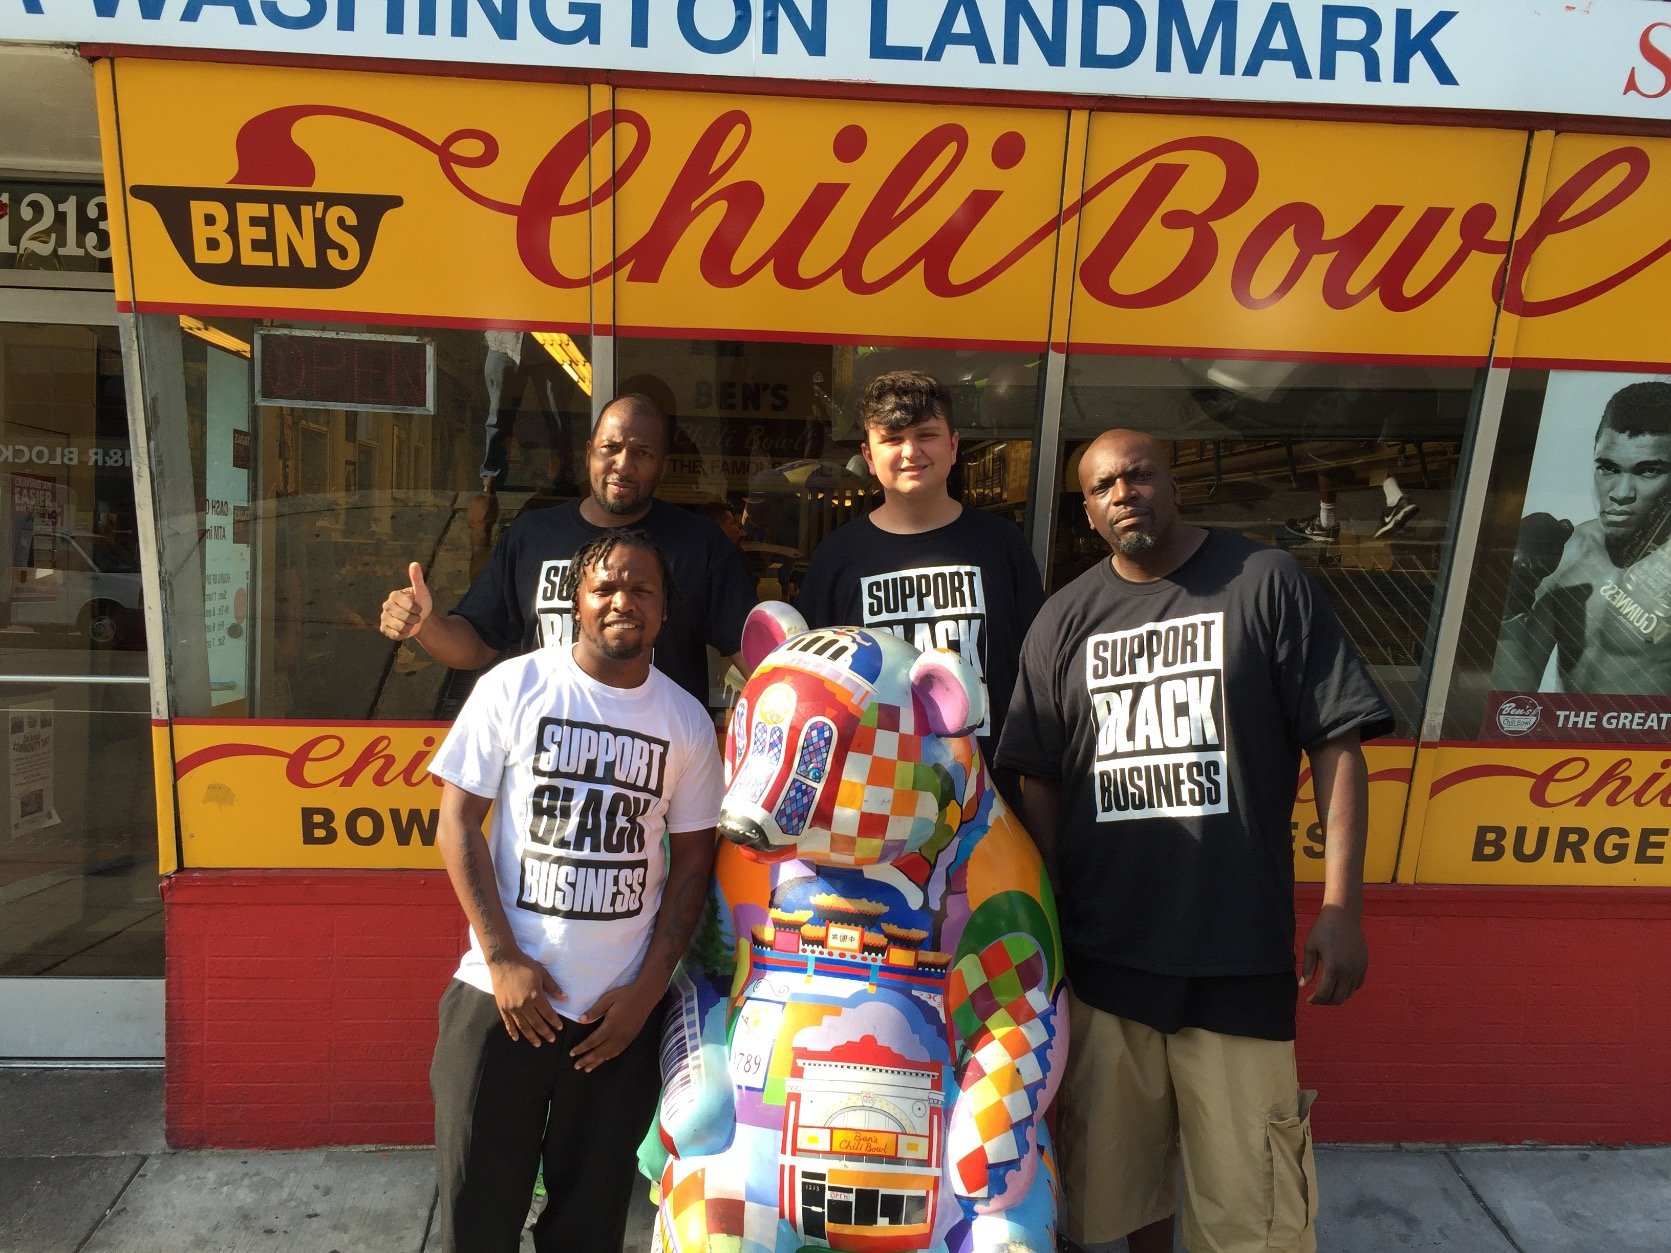 Born and Raised in Washington DC                                 Family Owner of Ben's Chili Bowl and Ben's Next Door